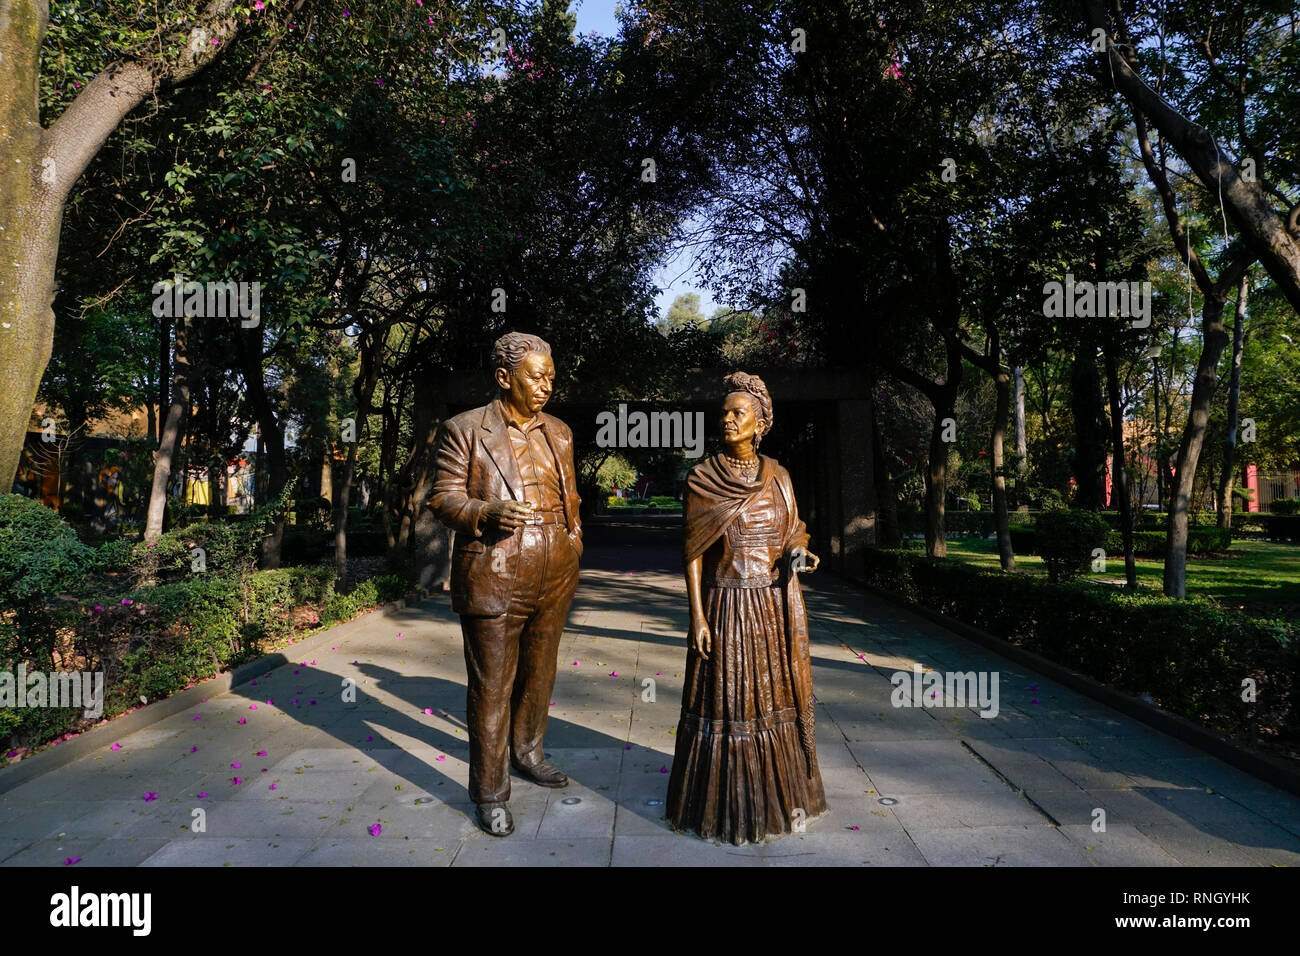 Bronze statues of Frida Kahlo and Diego Rivera in Parque Frida Kahlo in the Coyoacon neighborhood of Mexico City, Mexico.i Stock Photo